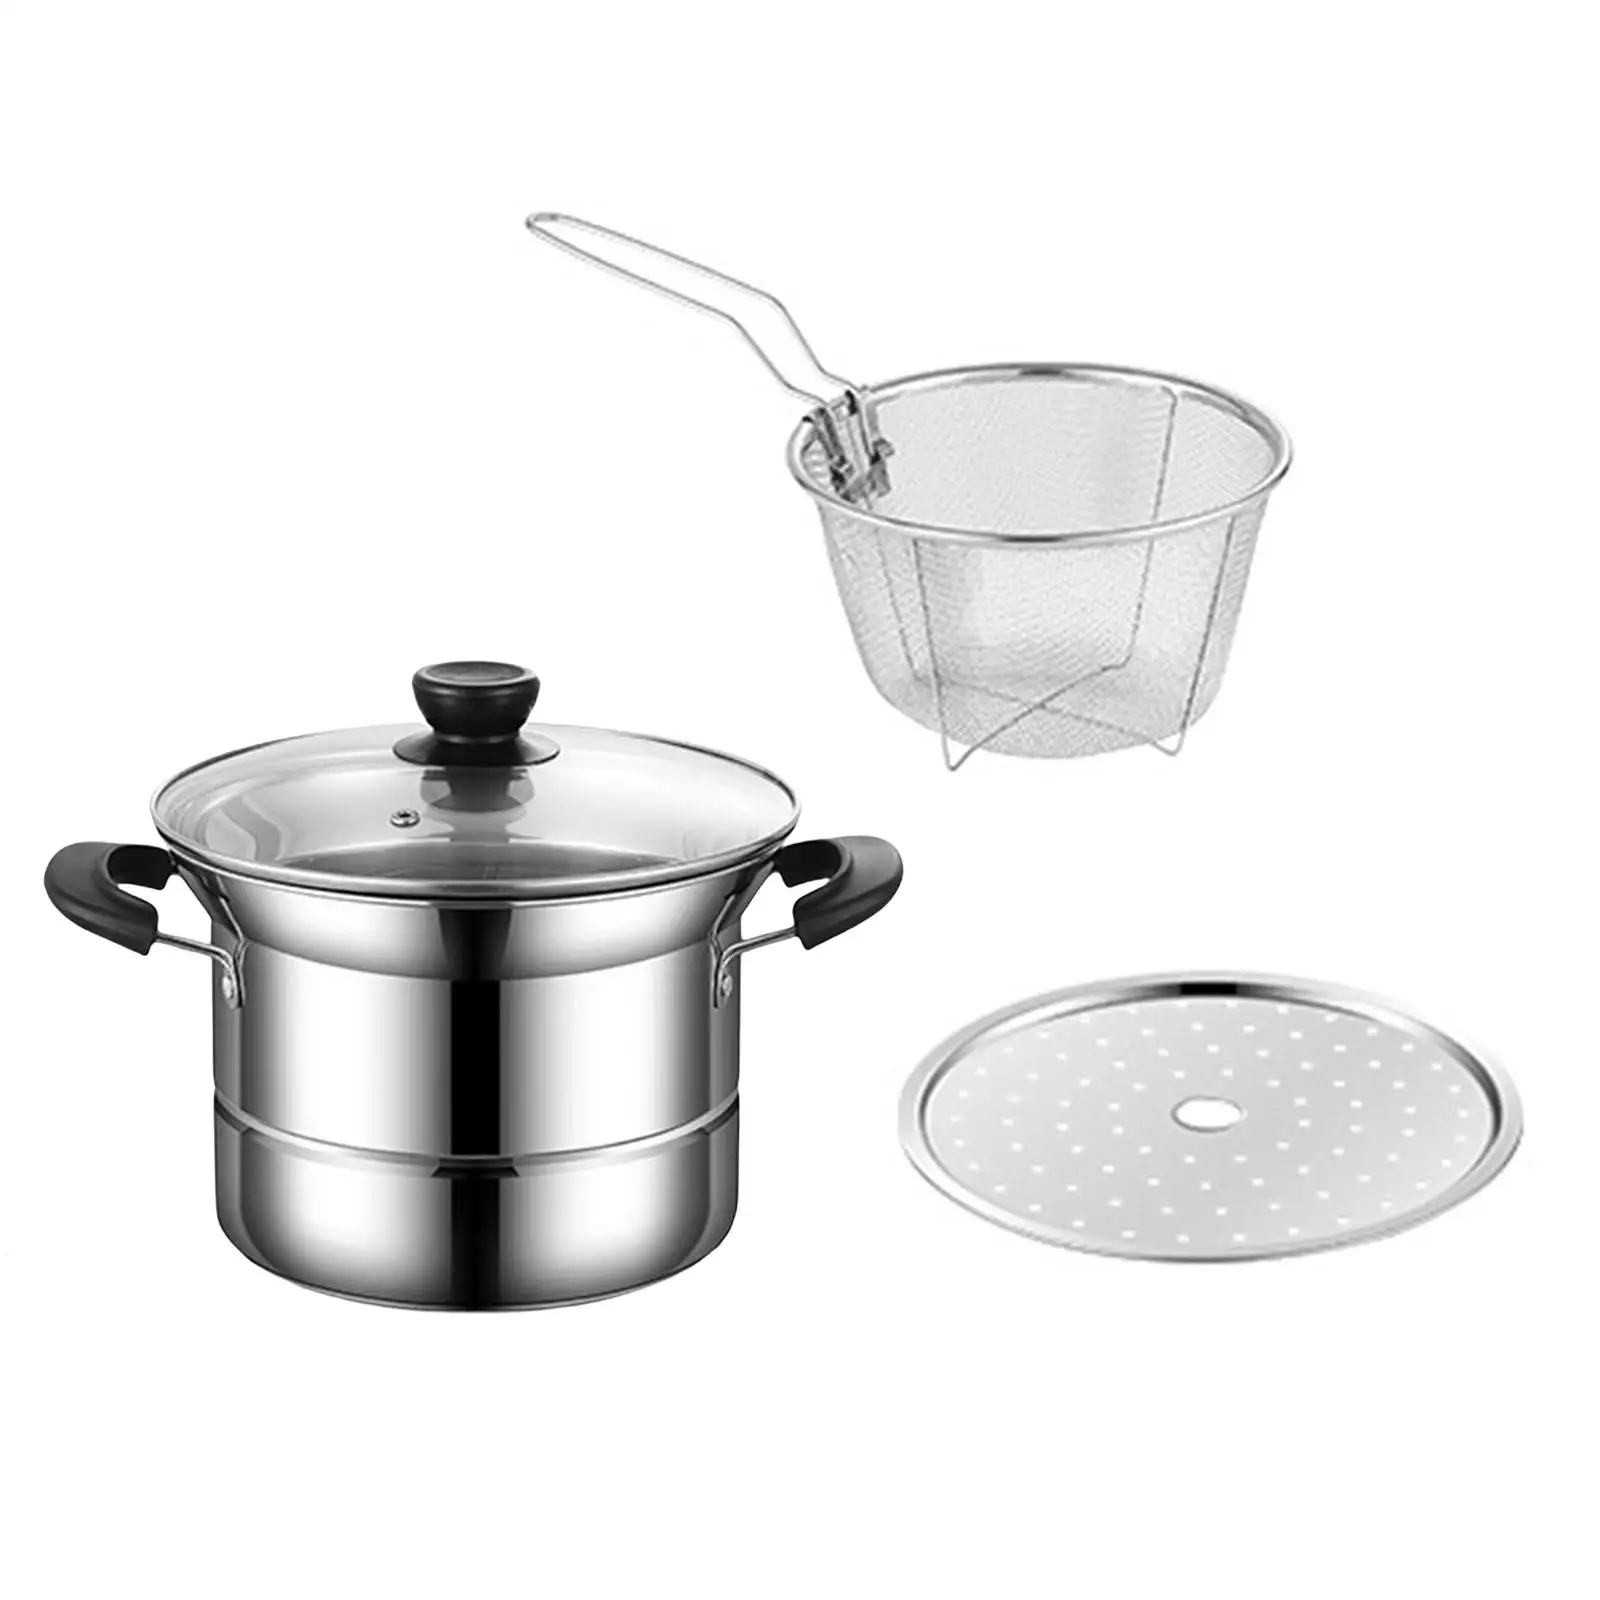 Saucepan Milk Pot Cooker Soup Pot Universal with Lid Handle Utensils Small Pot for Backpacking Dining Room Cooking Kitchen